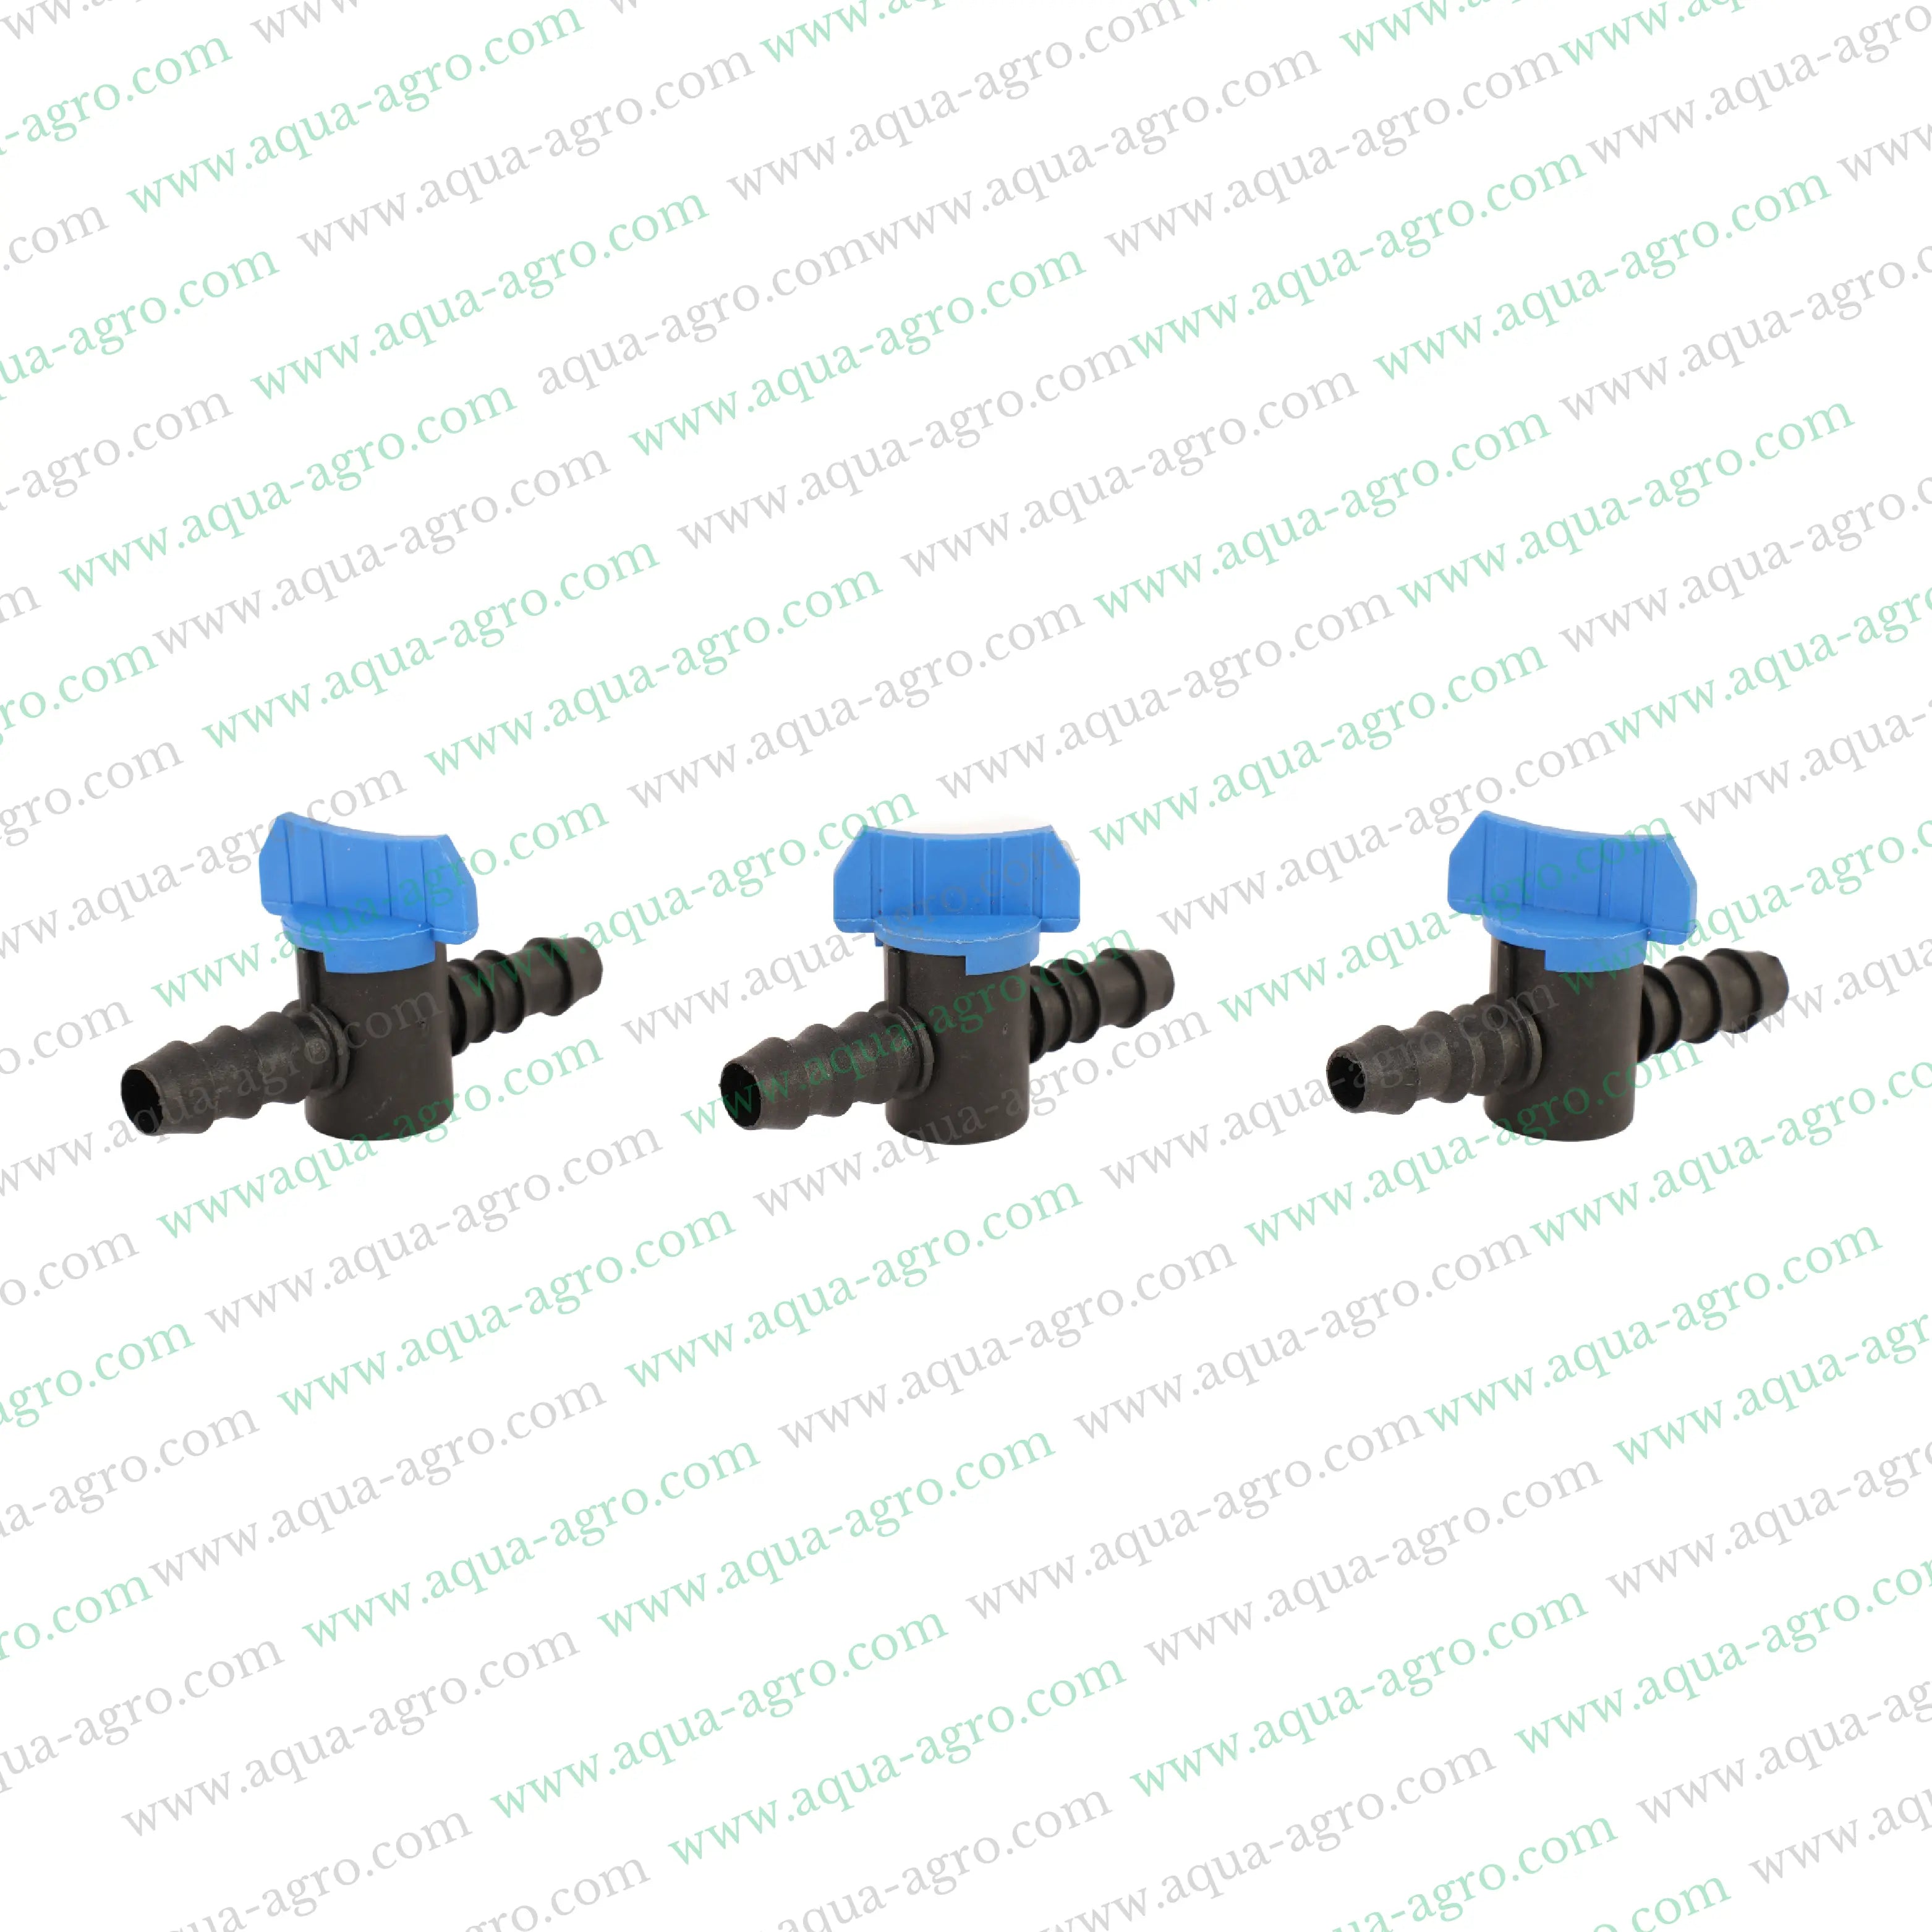 AQUA - AGRO | Drip Fittings And Accessories - Barbed Fittings - Lite - Drip tap - 12mm